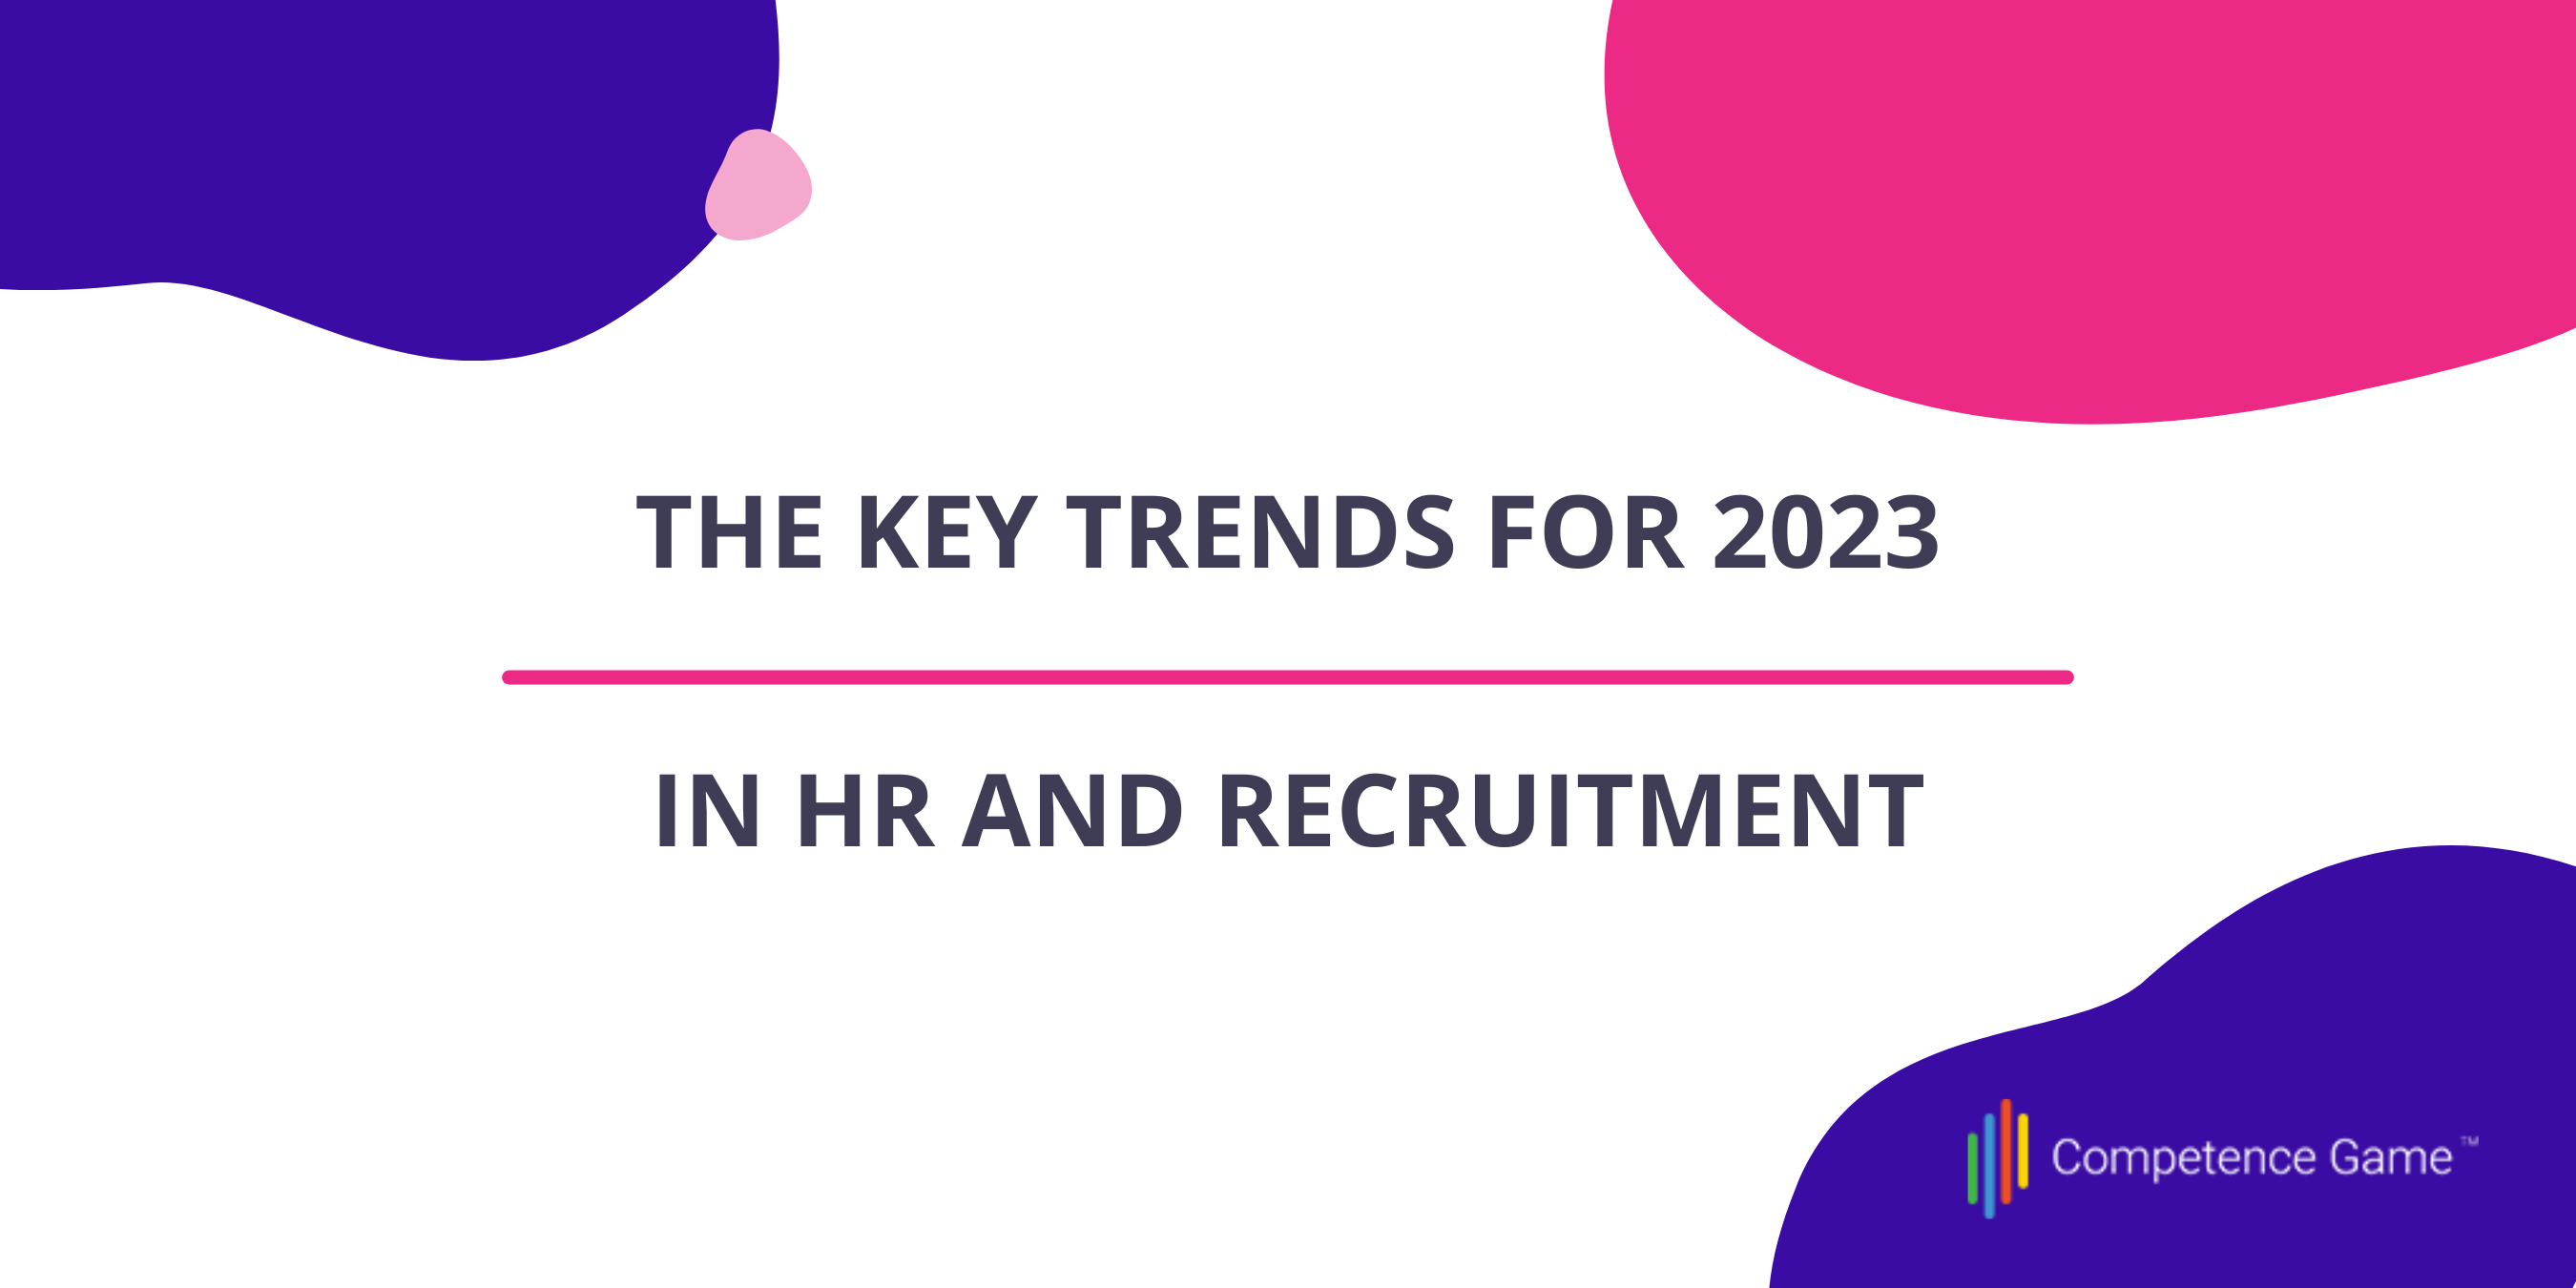 10 recruitment trends for 2023